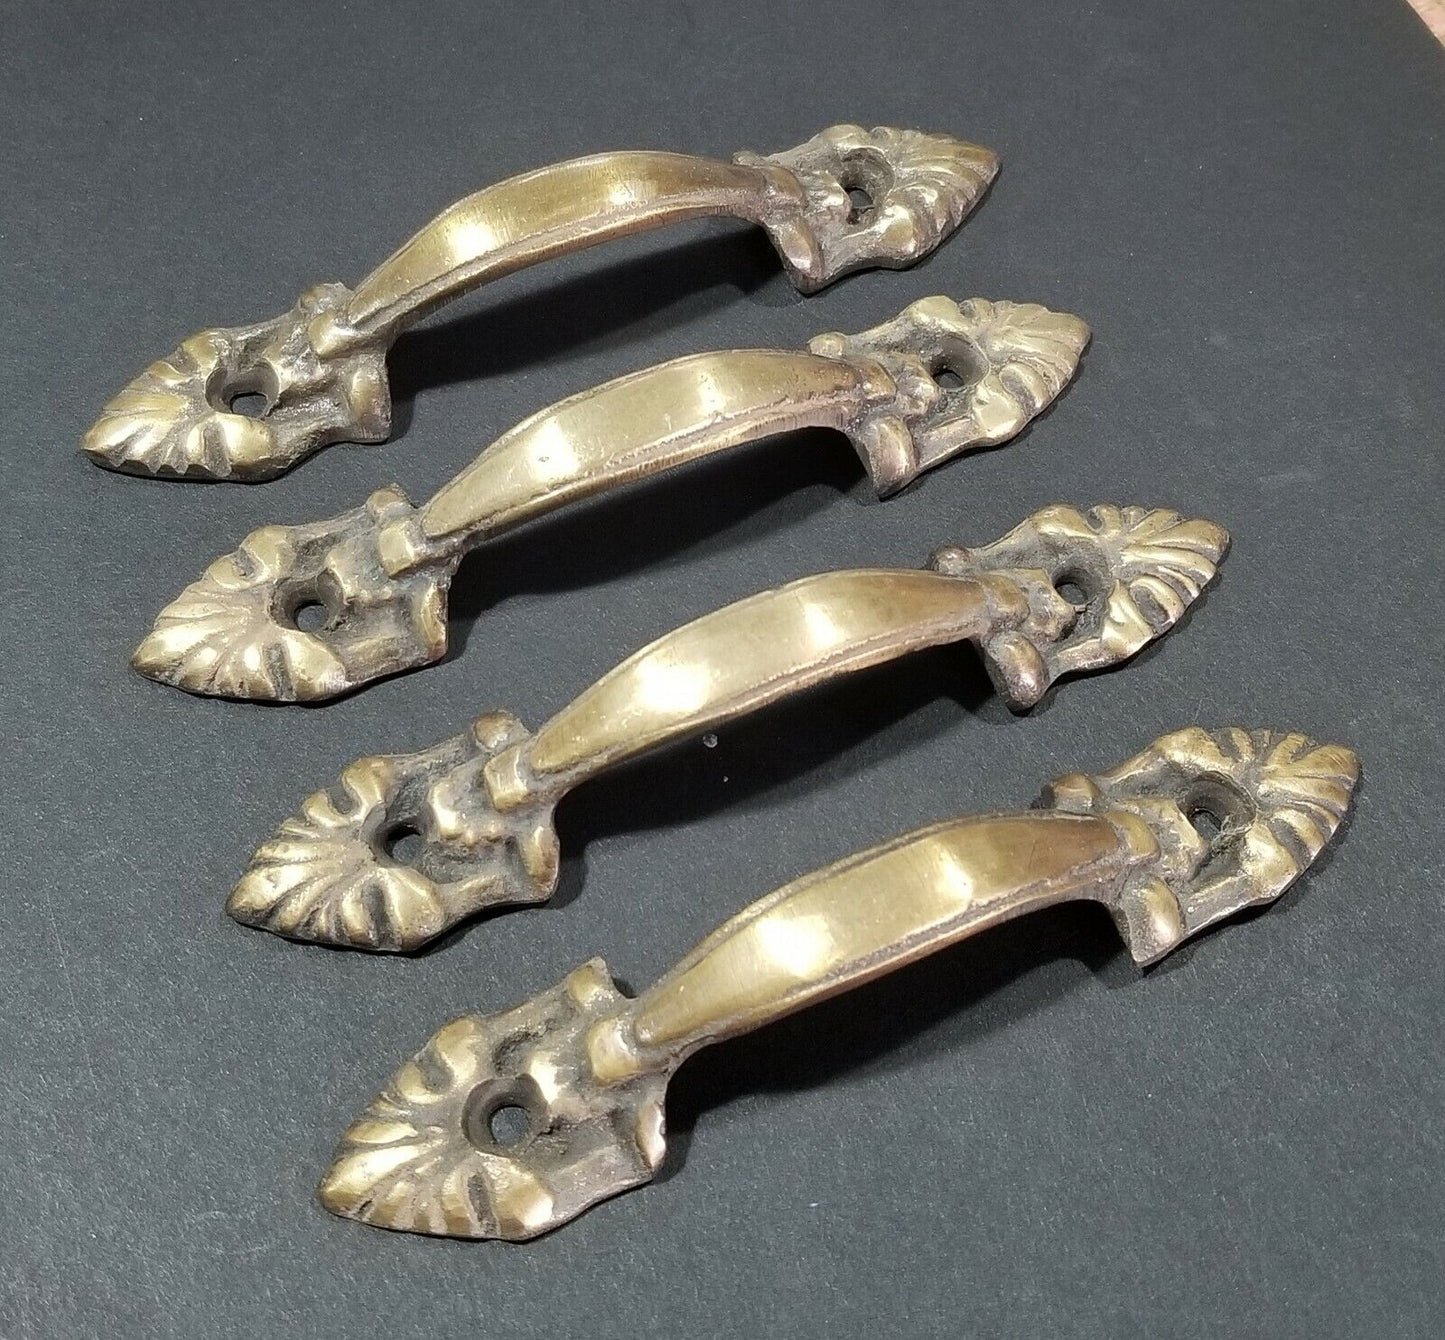 4 x  French Ornate Cabinet Drawer Pull Handles  4-3/8" long solid brass #P4